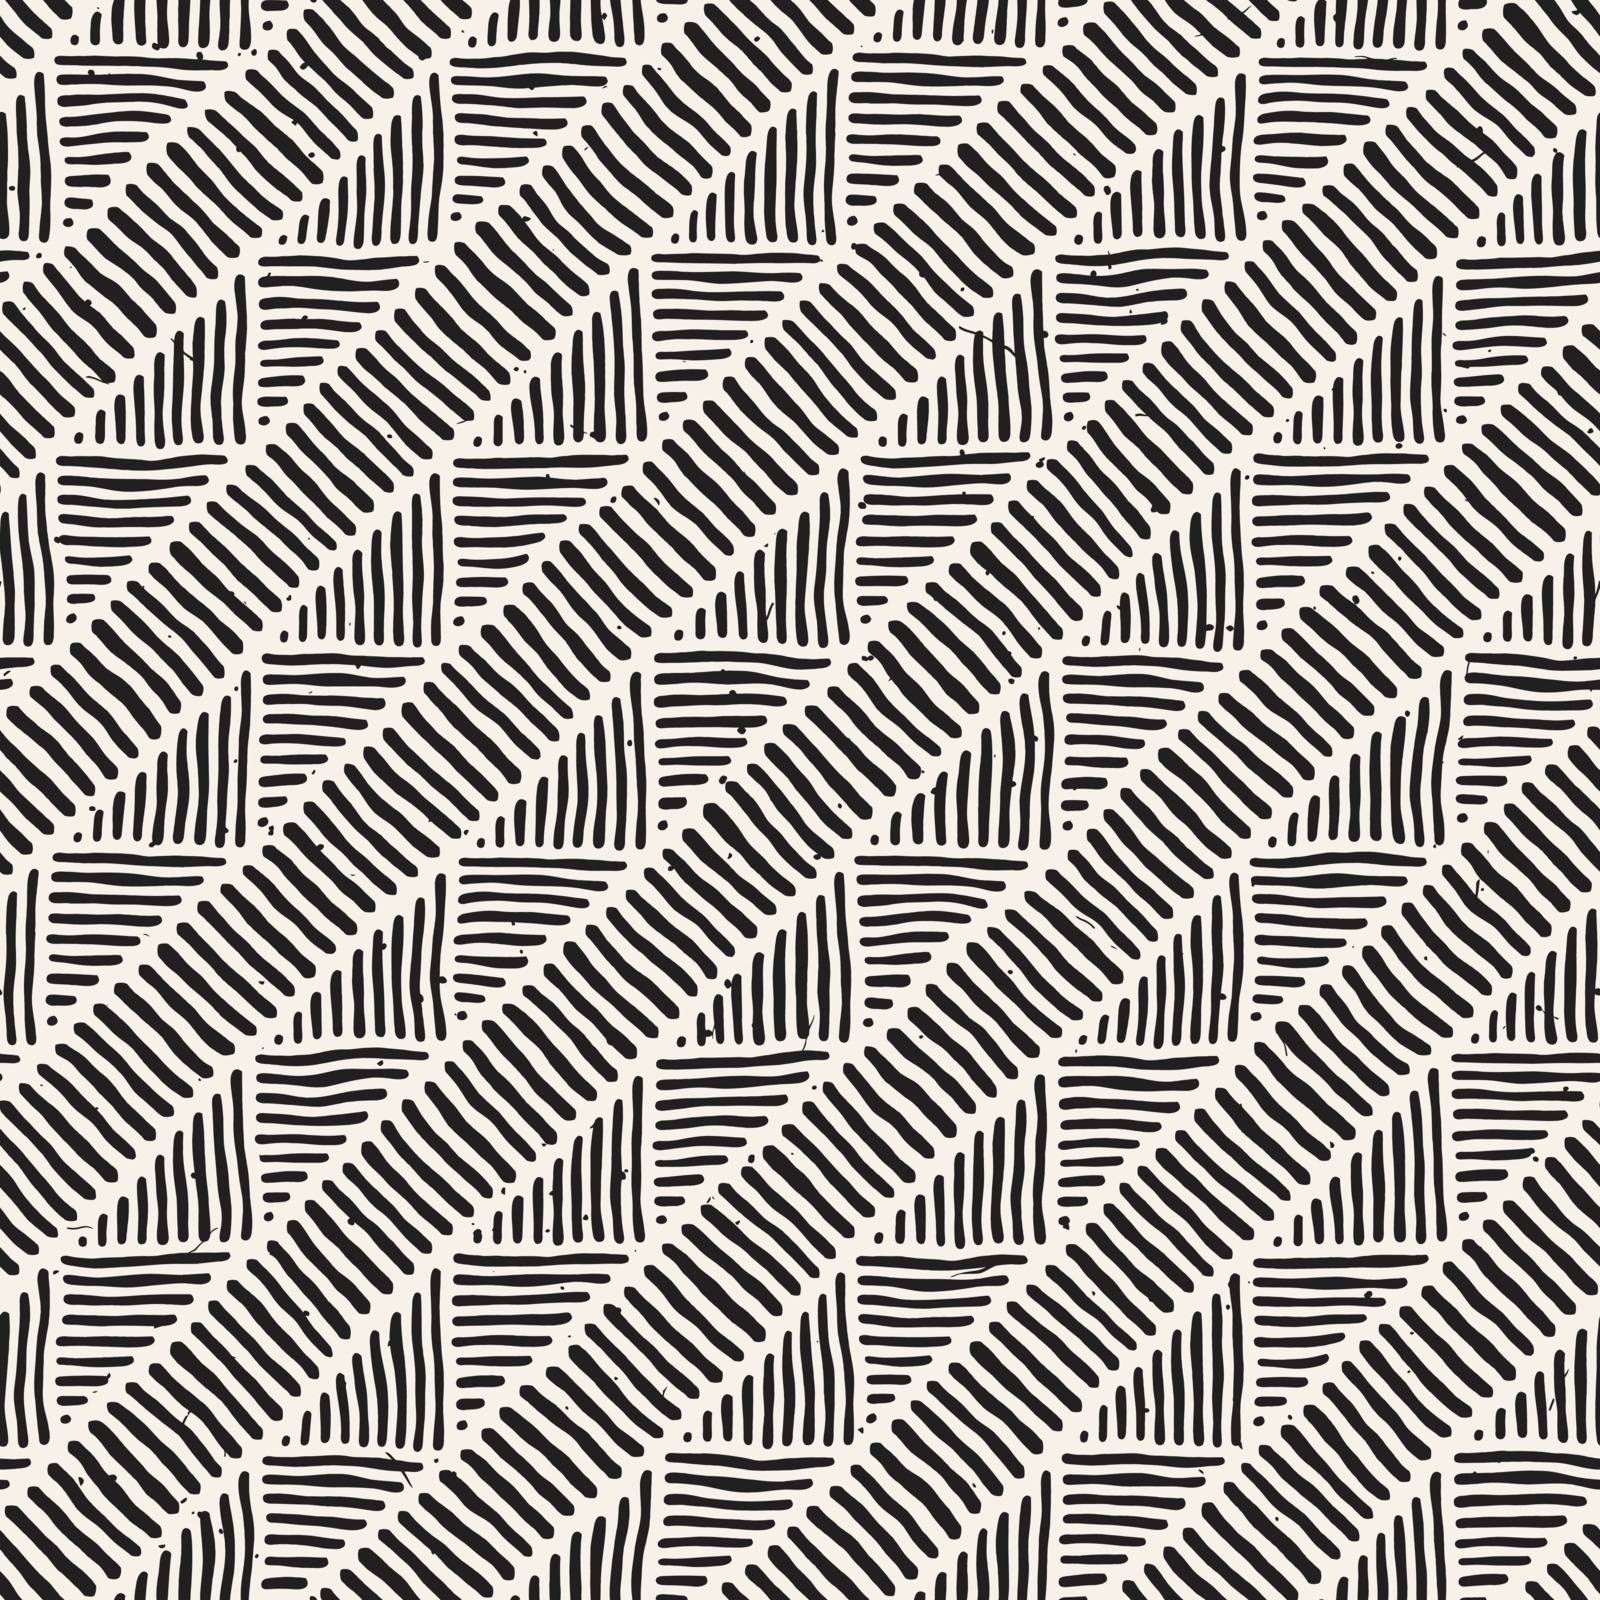 Hand drawn style ethnic seamless pattern. Abstract geometric tiling background in black and white. by Samolevsky